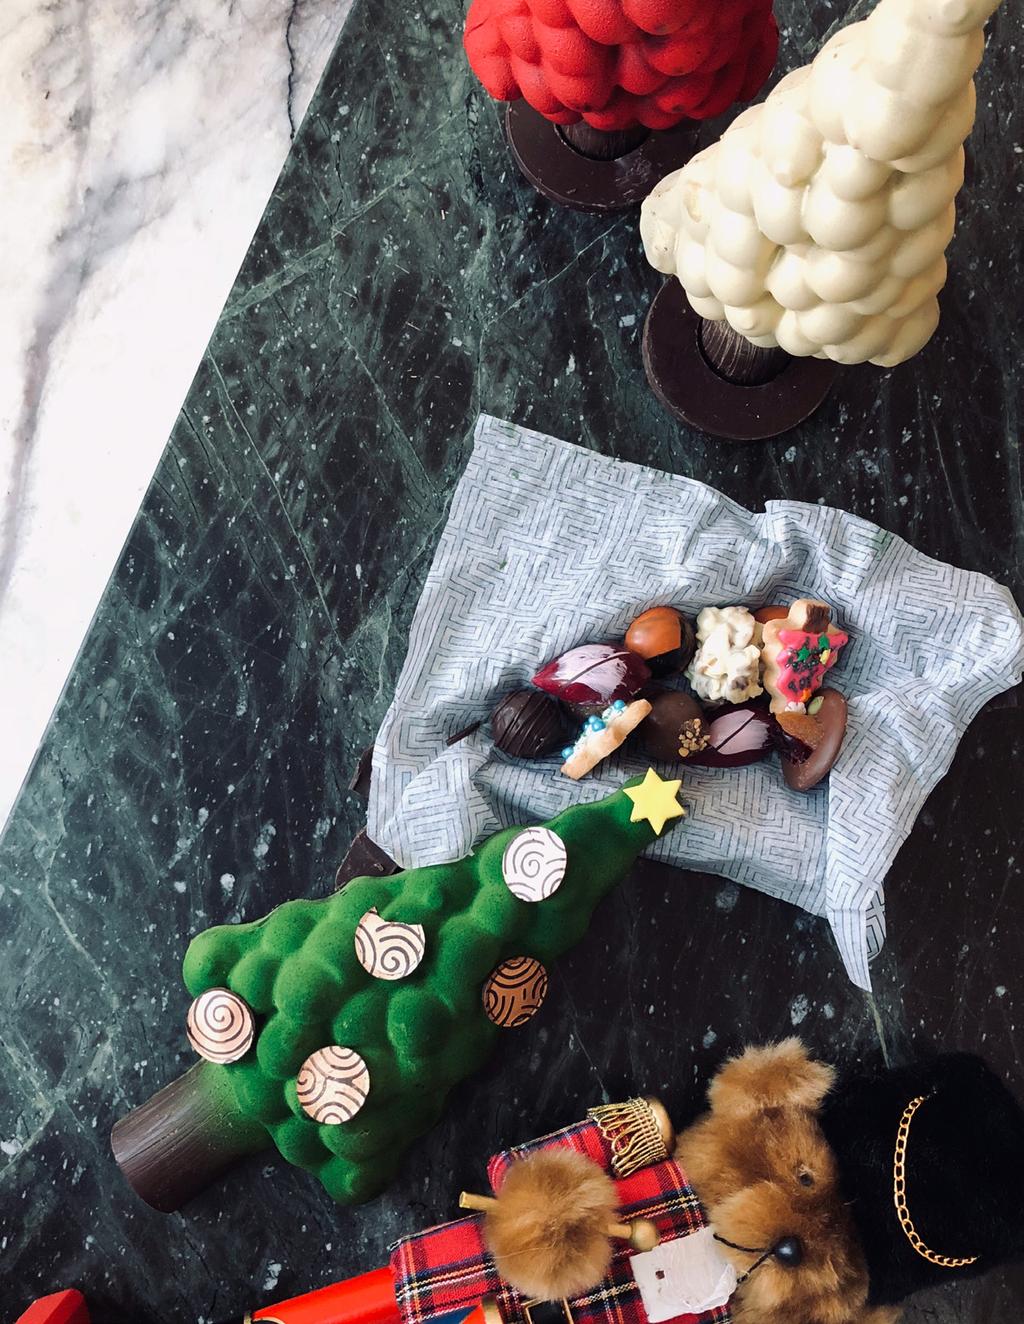 All Tey Want for Christmas Celebrated Pastry Chef, Fumiko Moreton, has created a special treat this holiday season using only the finest ingredients that one can indulge with concious.